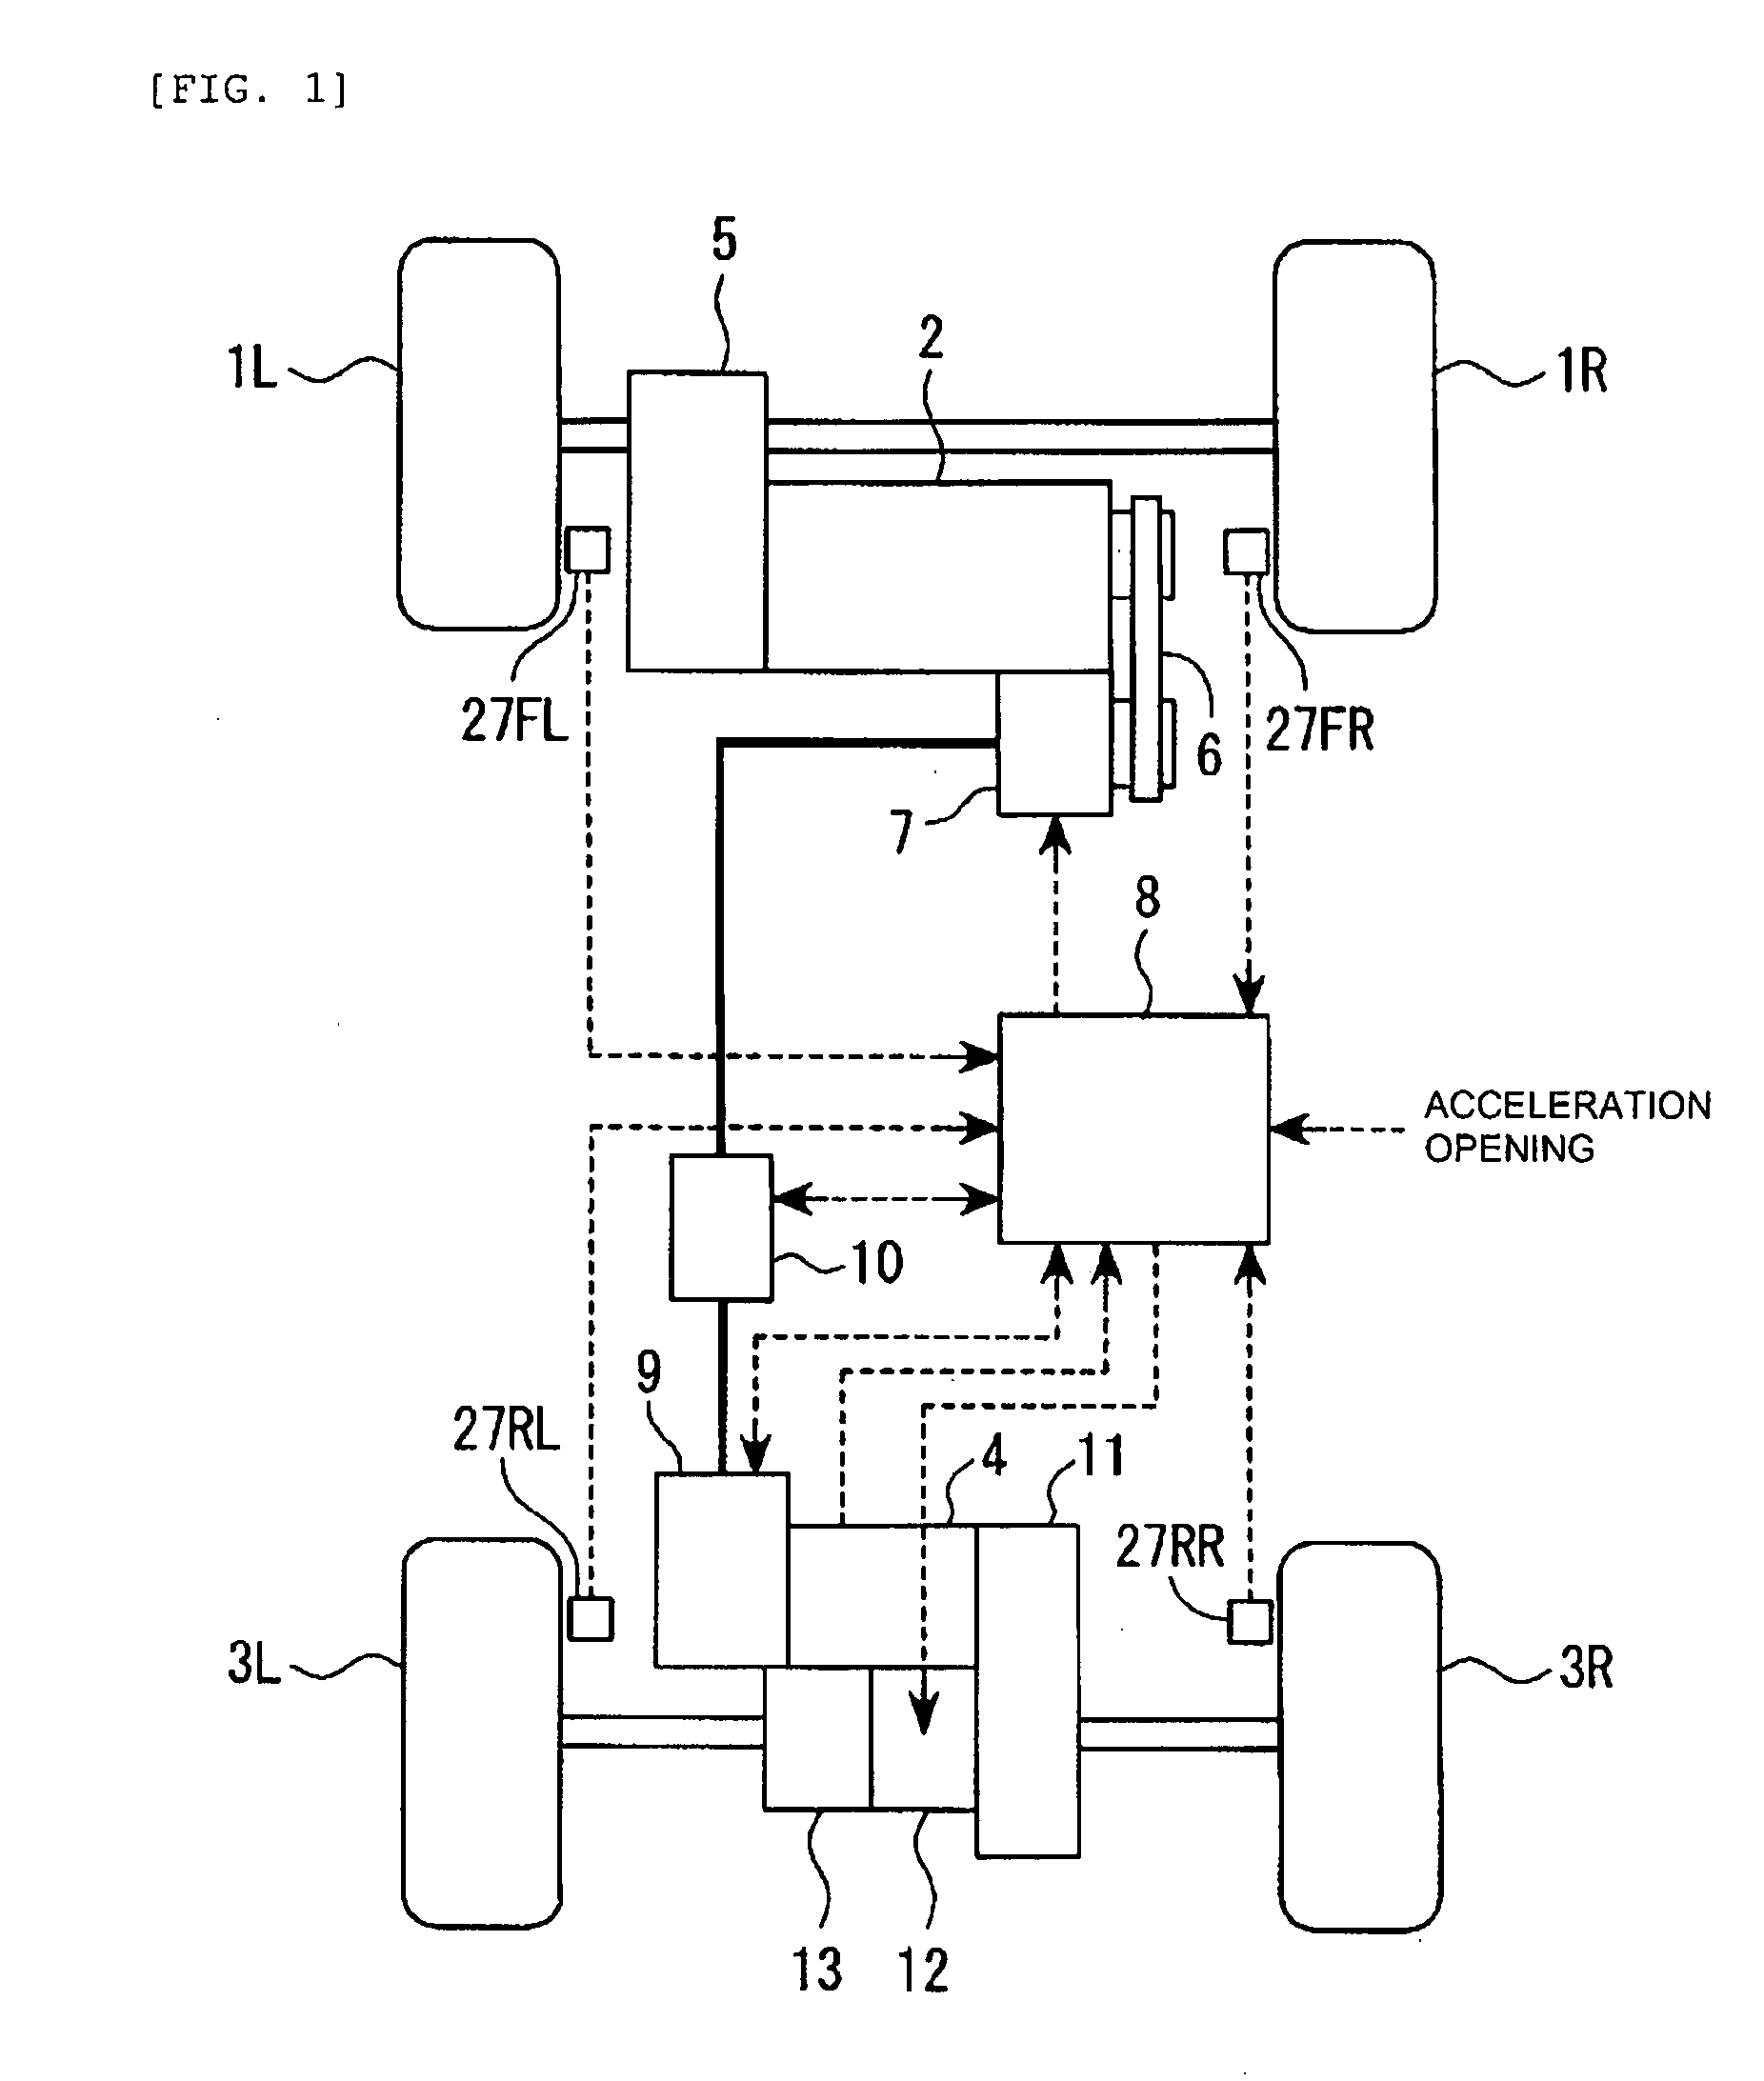 Vehicle drive control system, motor control device and a method for drive control of a vehicle